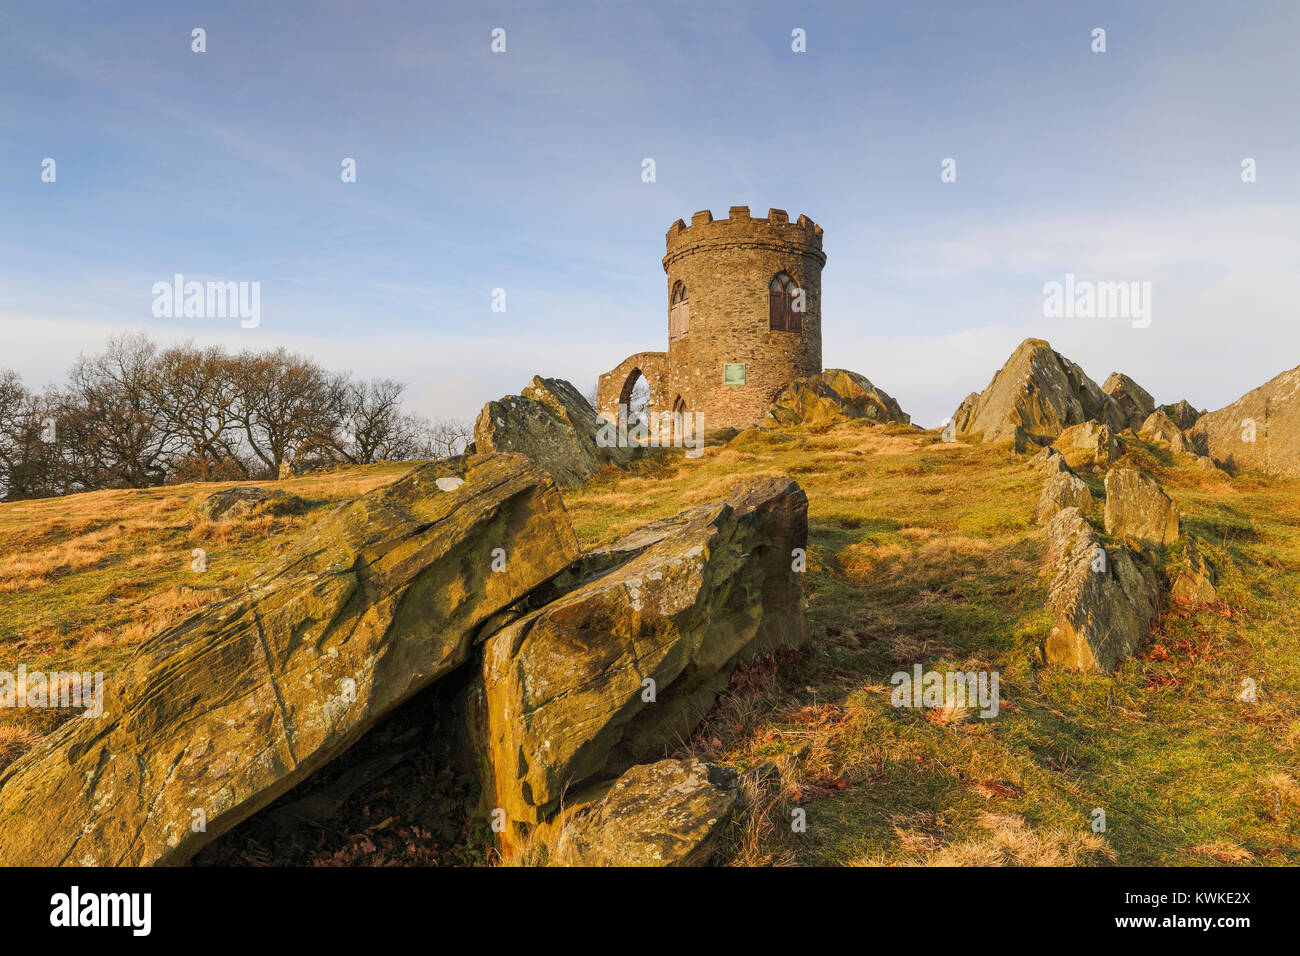 Old John in the early morning sun in Bradgate Park,Leicestershire, England. Stock Photo